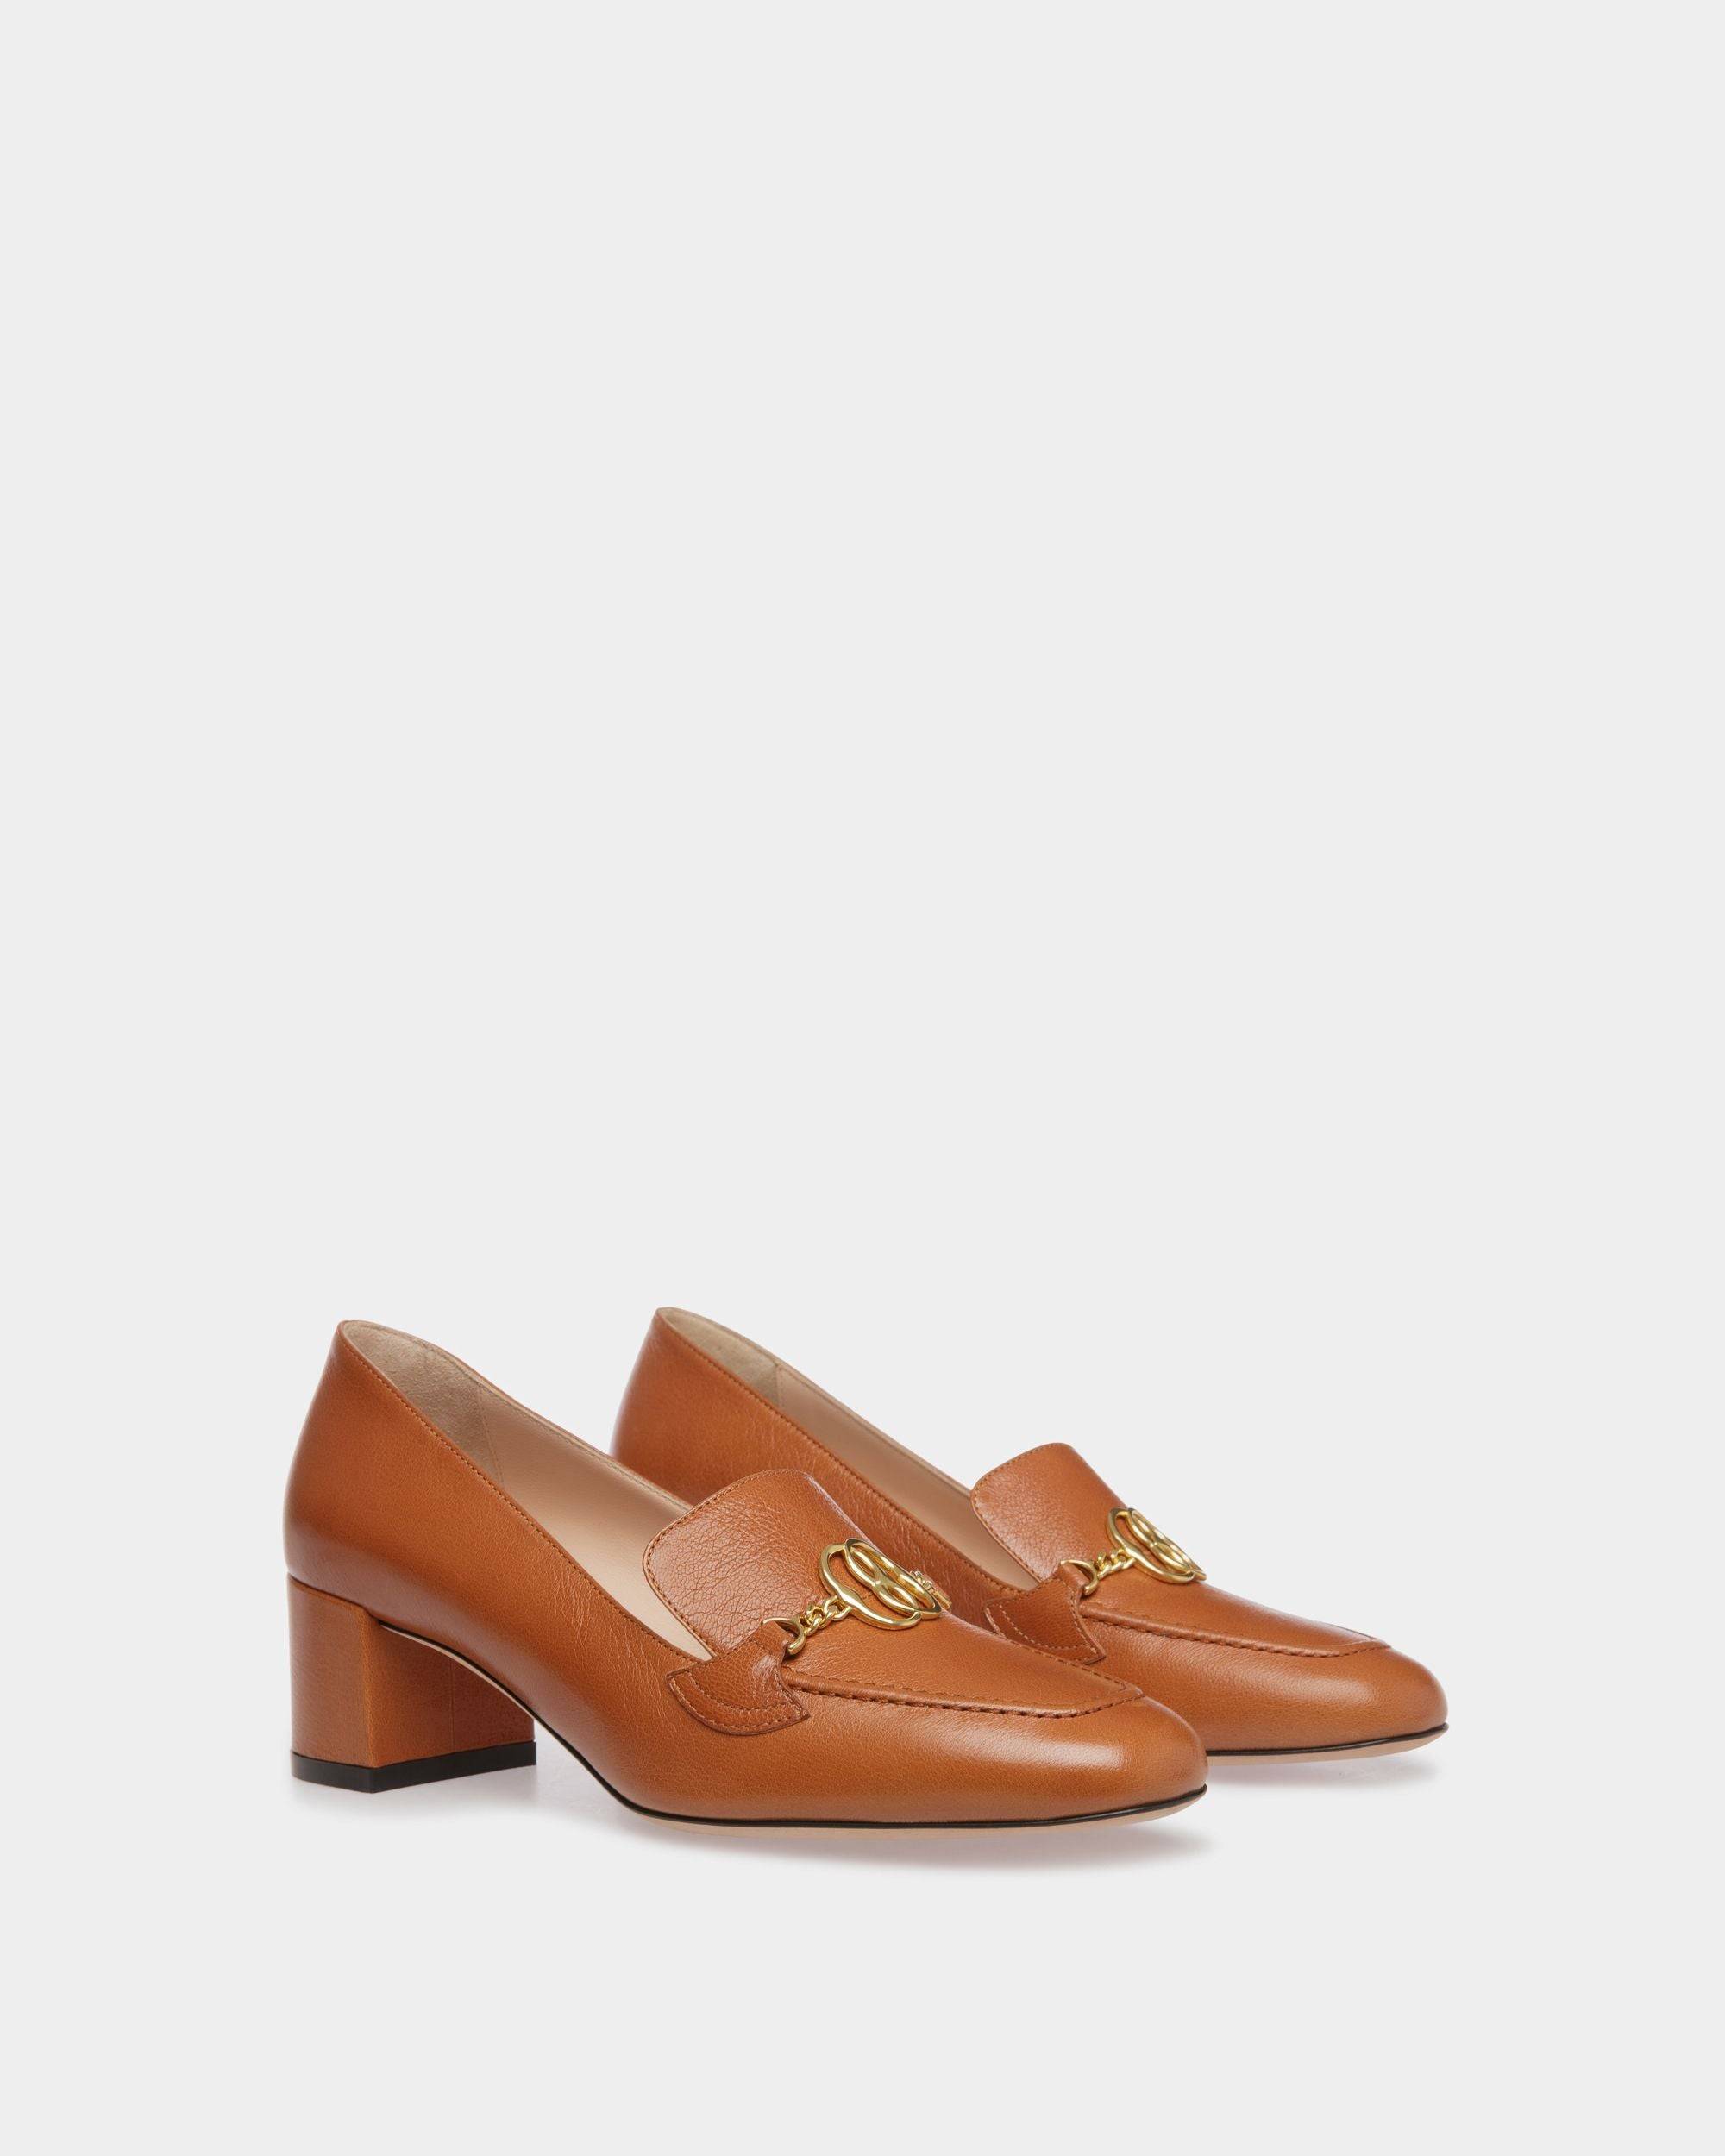 Obrien | Women's Pumps | Brown Leather | Bally | Still Life 3/4 Front